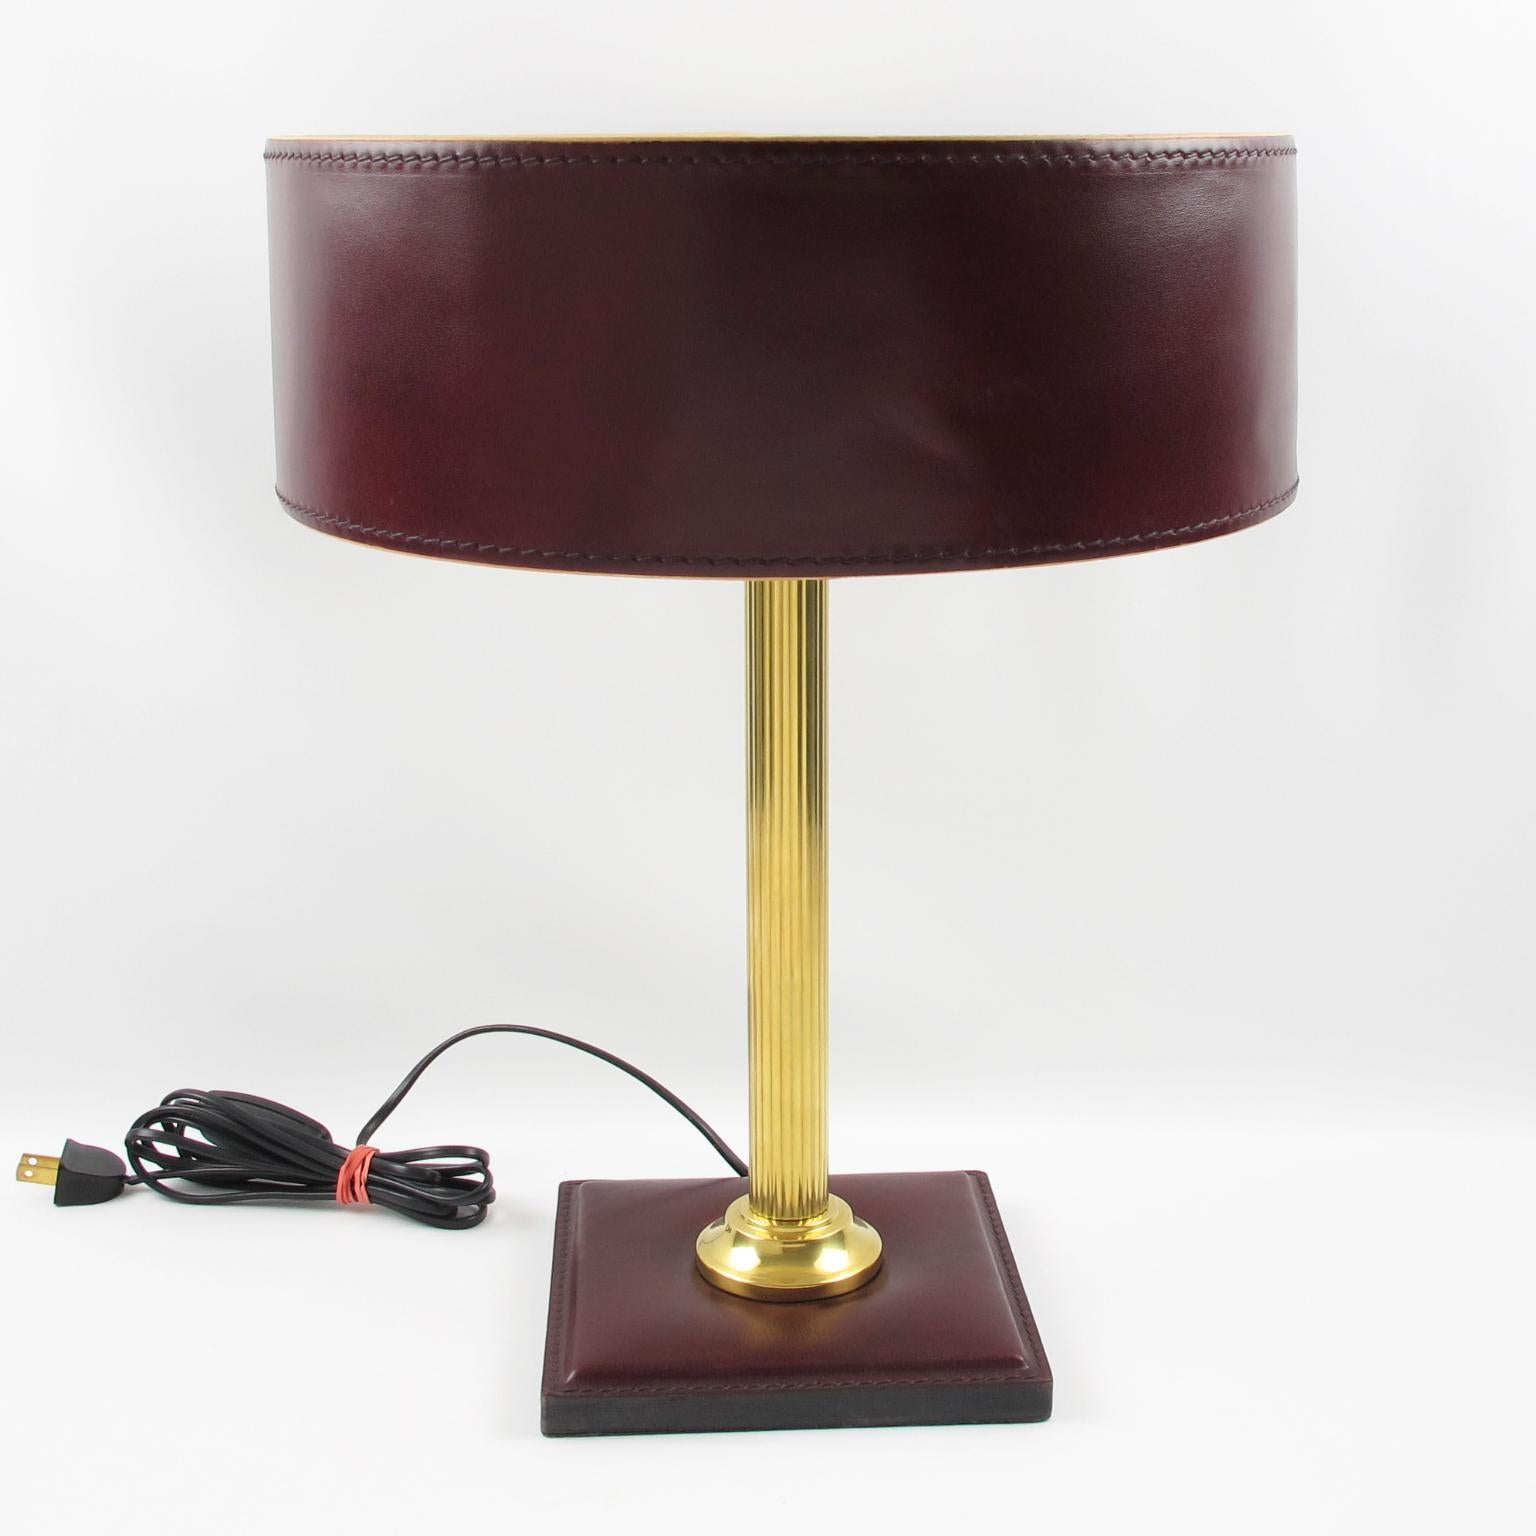 Elegant table lamp designed by Jacques Adnet, France. This stunning classical bordeaux-red color lamp features a hand-stitched shade with ivory paper lining, polished brass reeded column stem, and square base in same hand-stitched bordeaux leather.